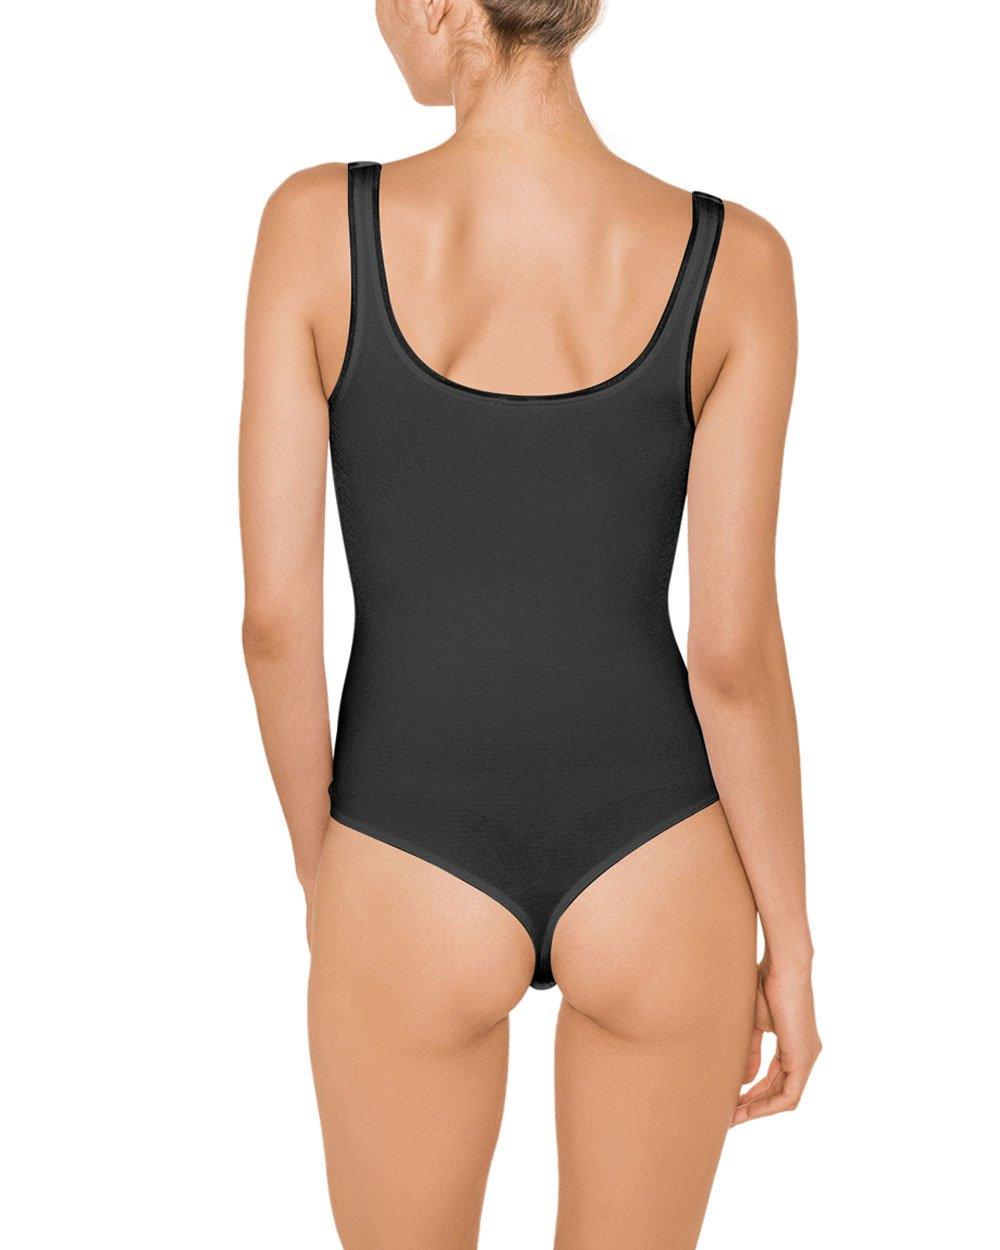 Wolford OUTLET, Jamaika String Body im SALE